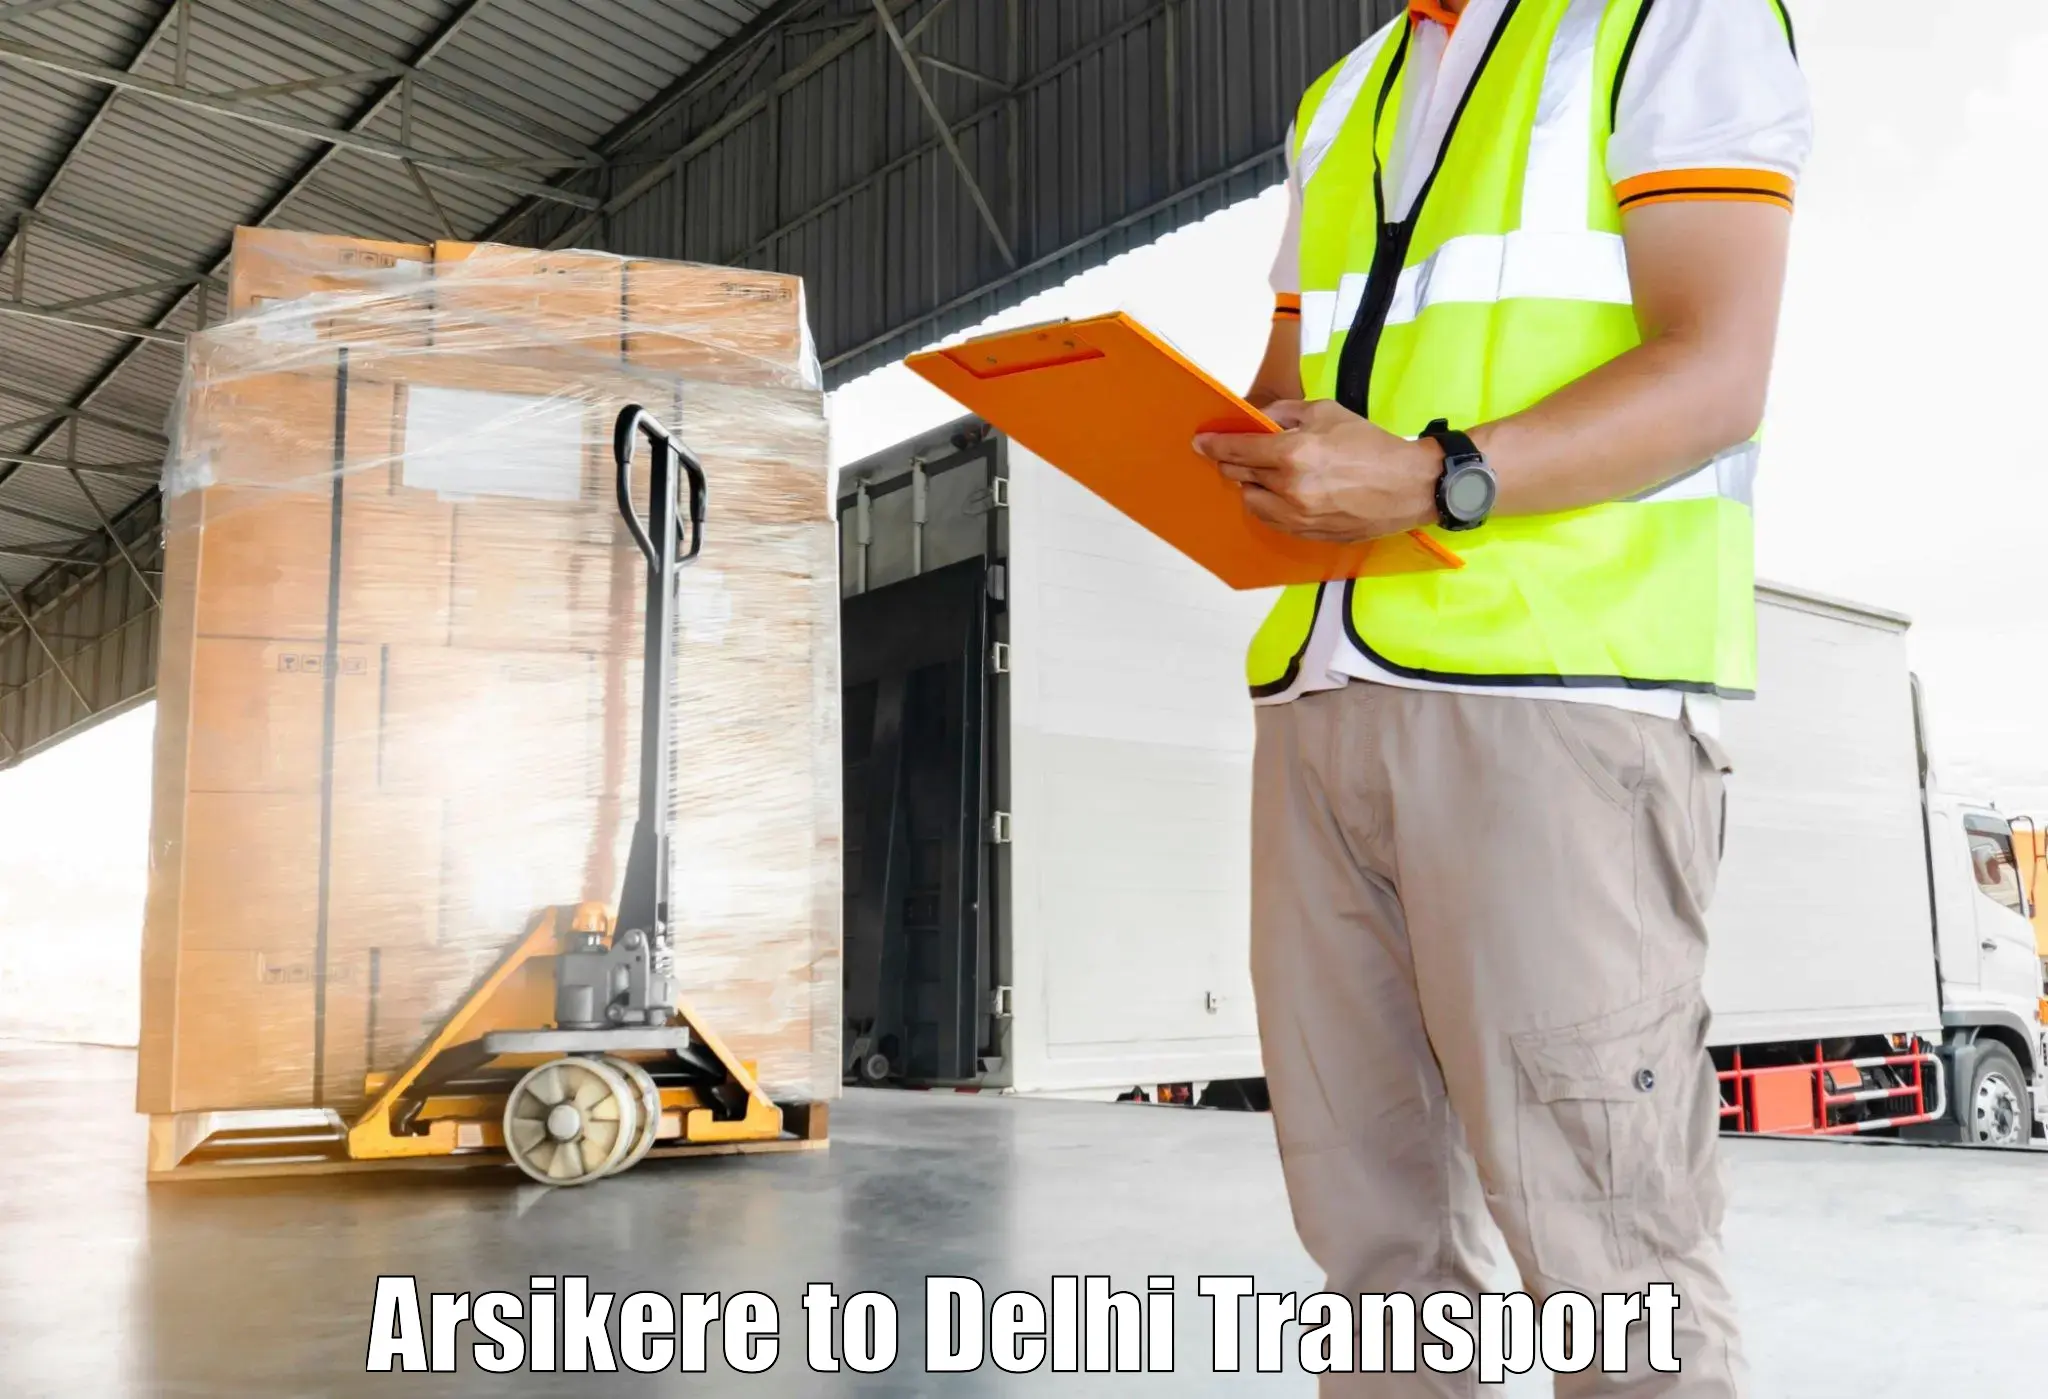 Two wheeler transport services Arsikere to Lodhi Road